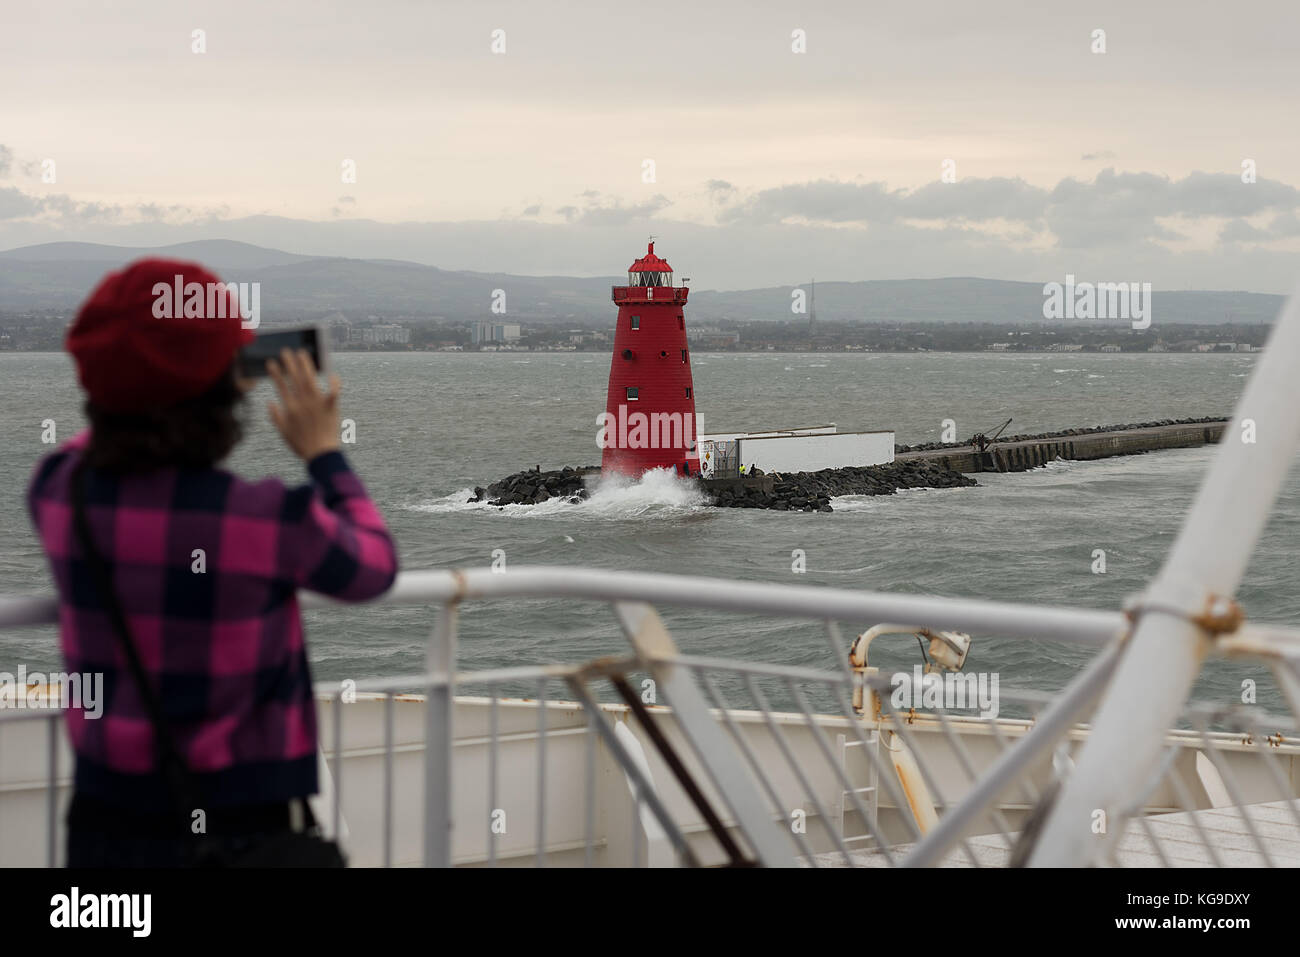 A women with a red hat takes a smart phone snap shop holiday photo of Poolbeg lighthouse out on deck of a ferry leaving Dublin port. Stock Photo